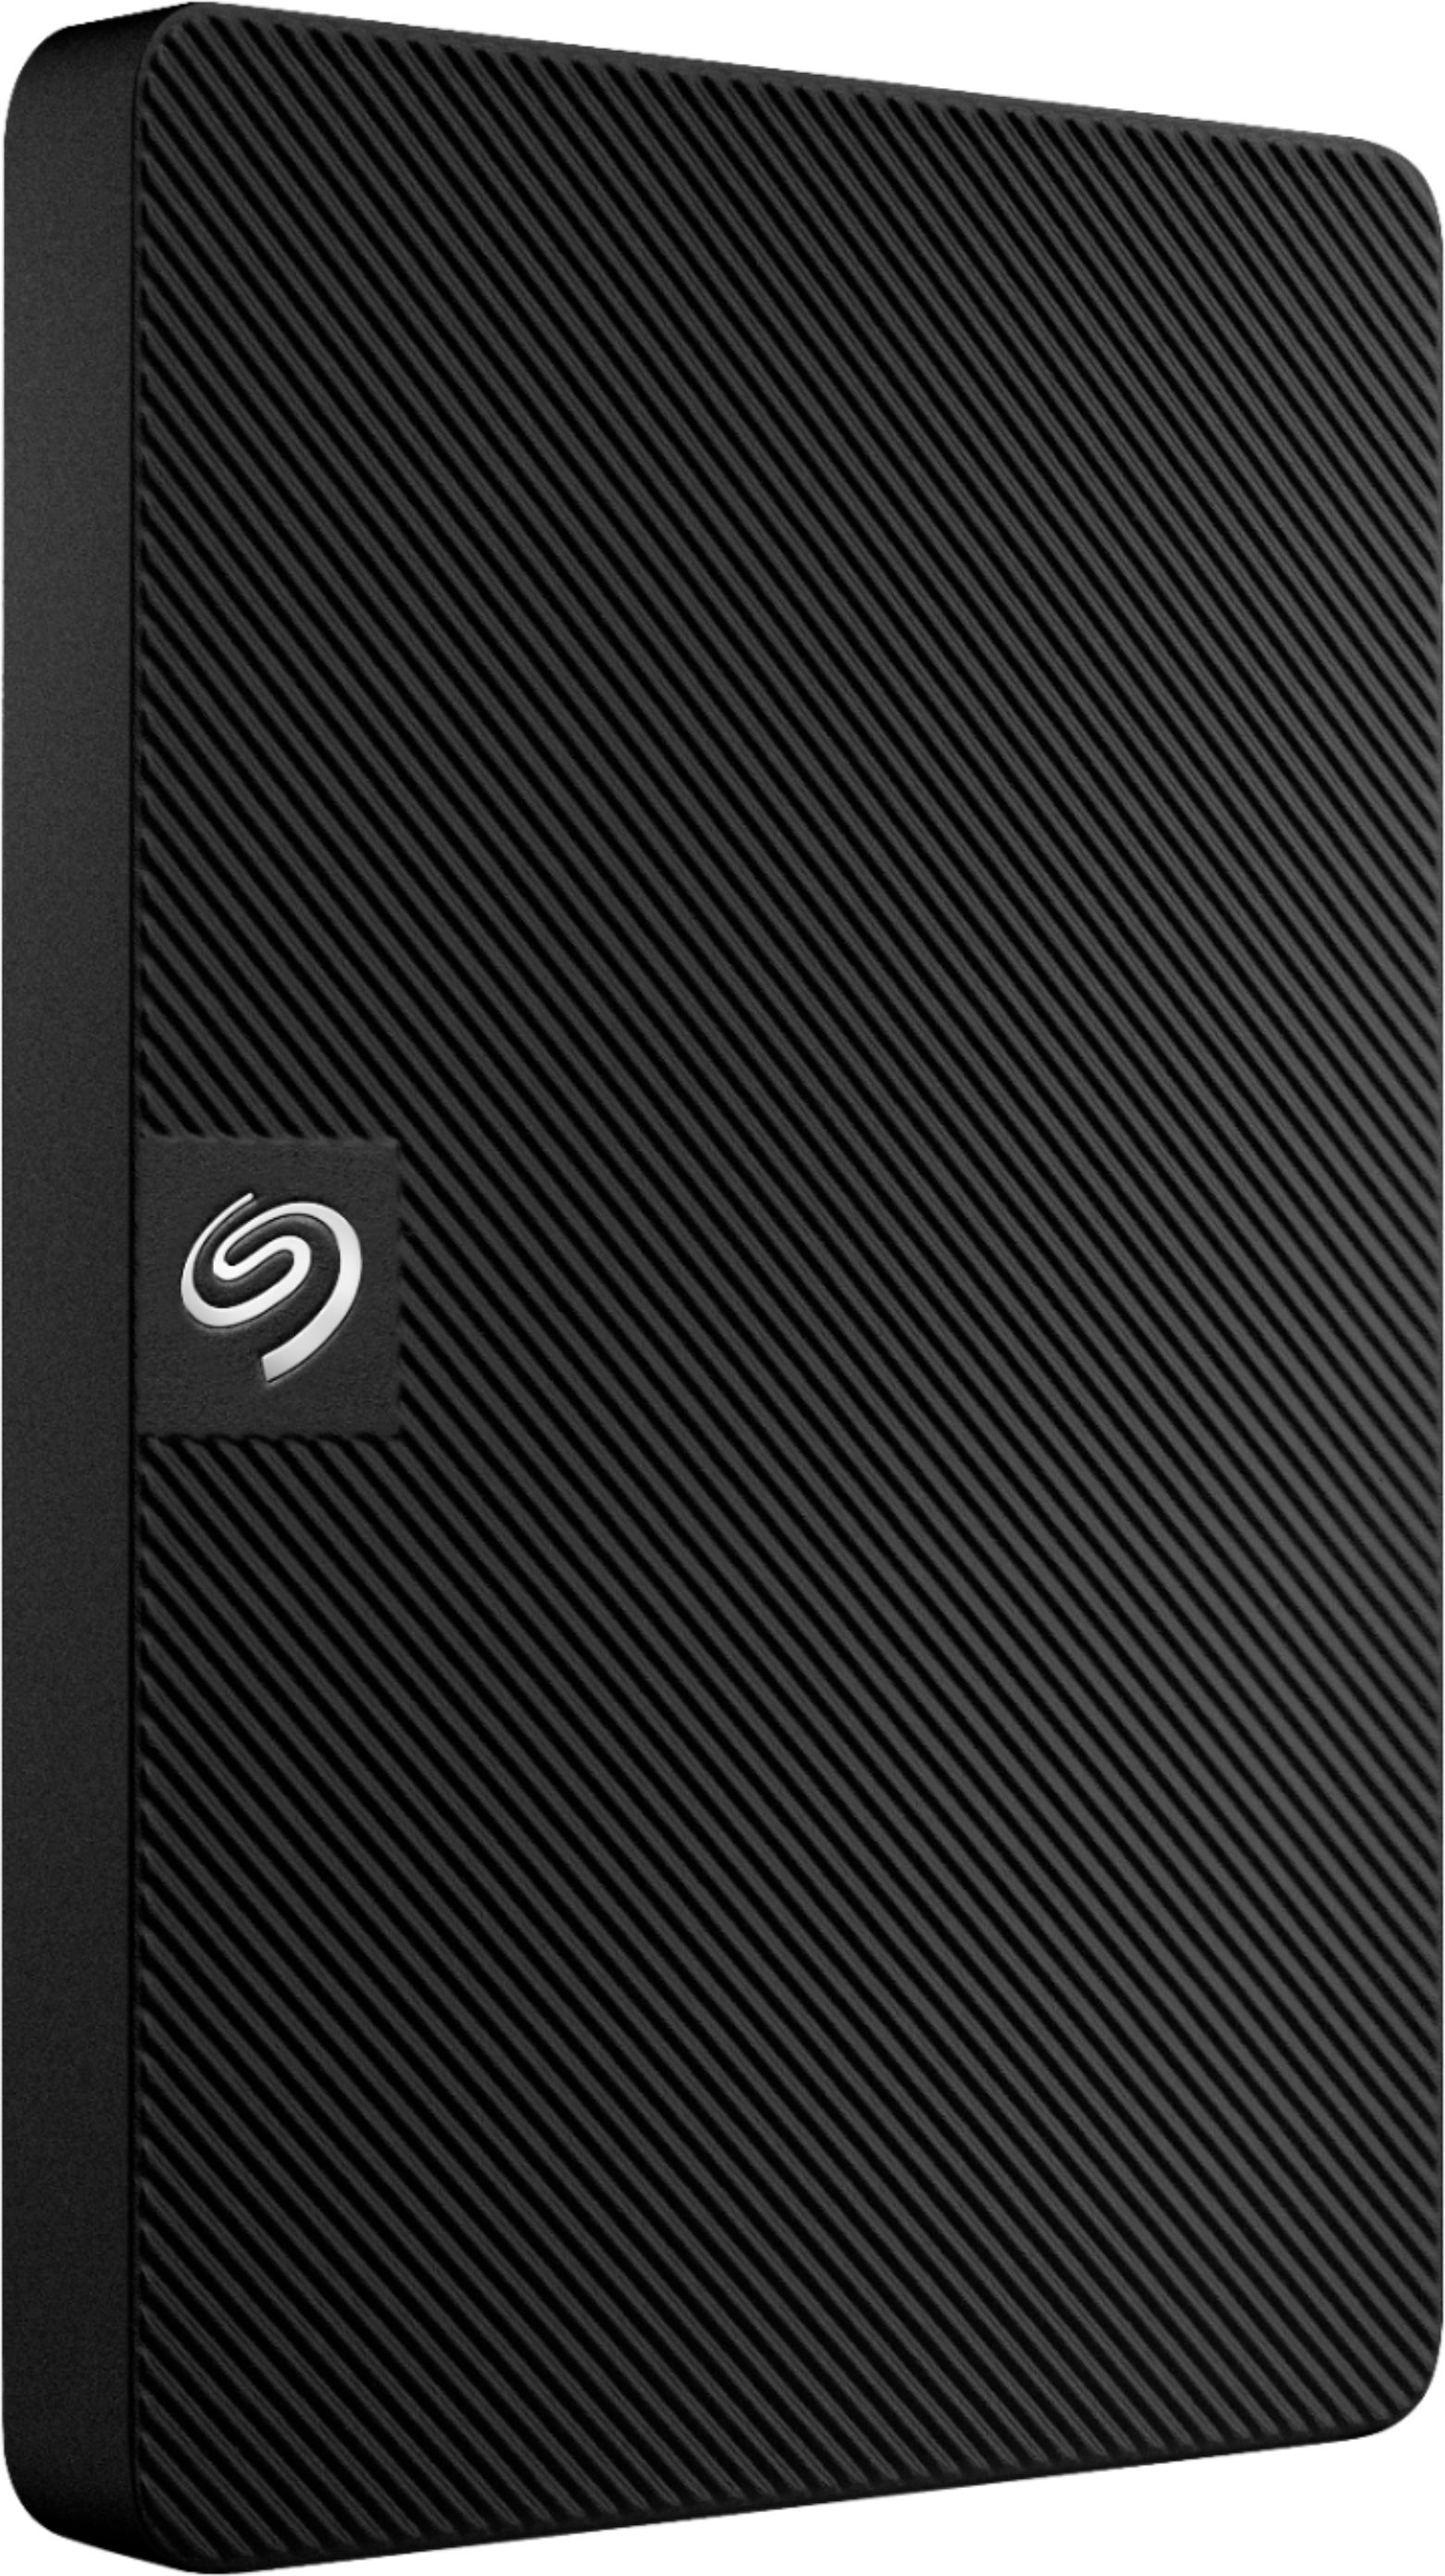 Angle View: Seagate - Expansion 2TB External USB 3.0 Portable Hard Drive with Rescue Data Recovery Services - Black